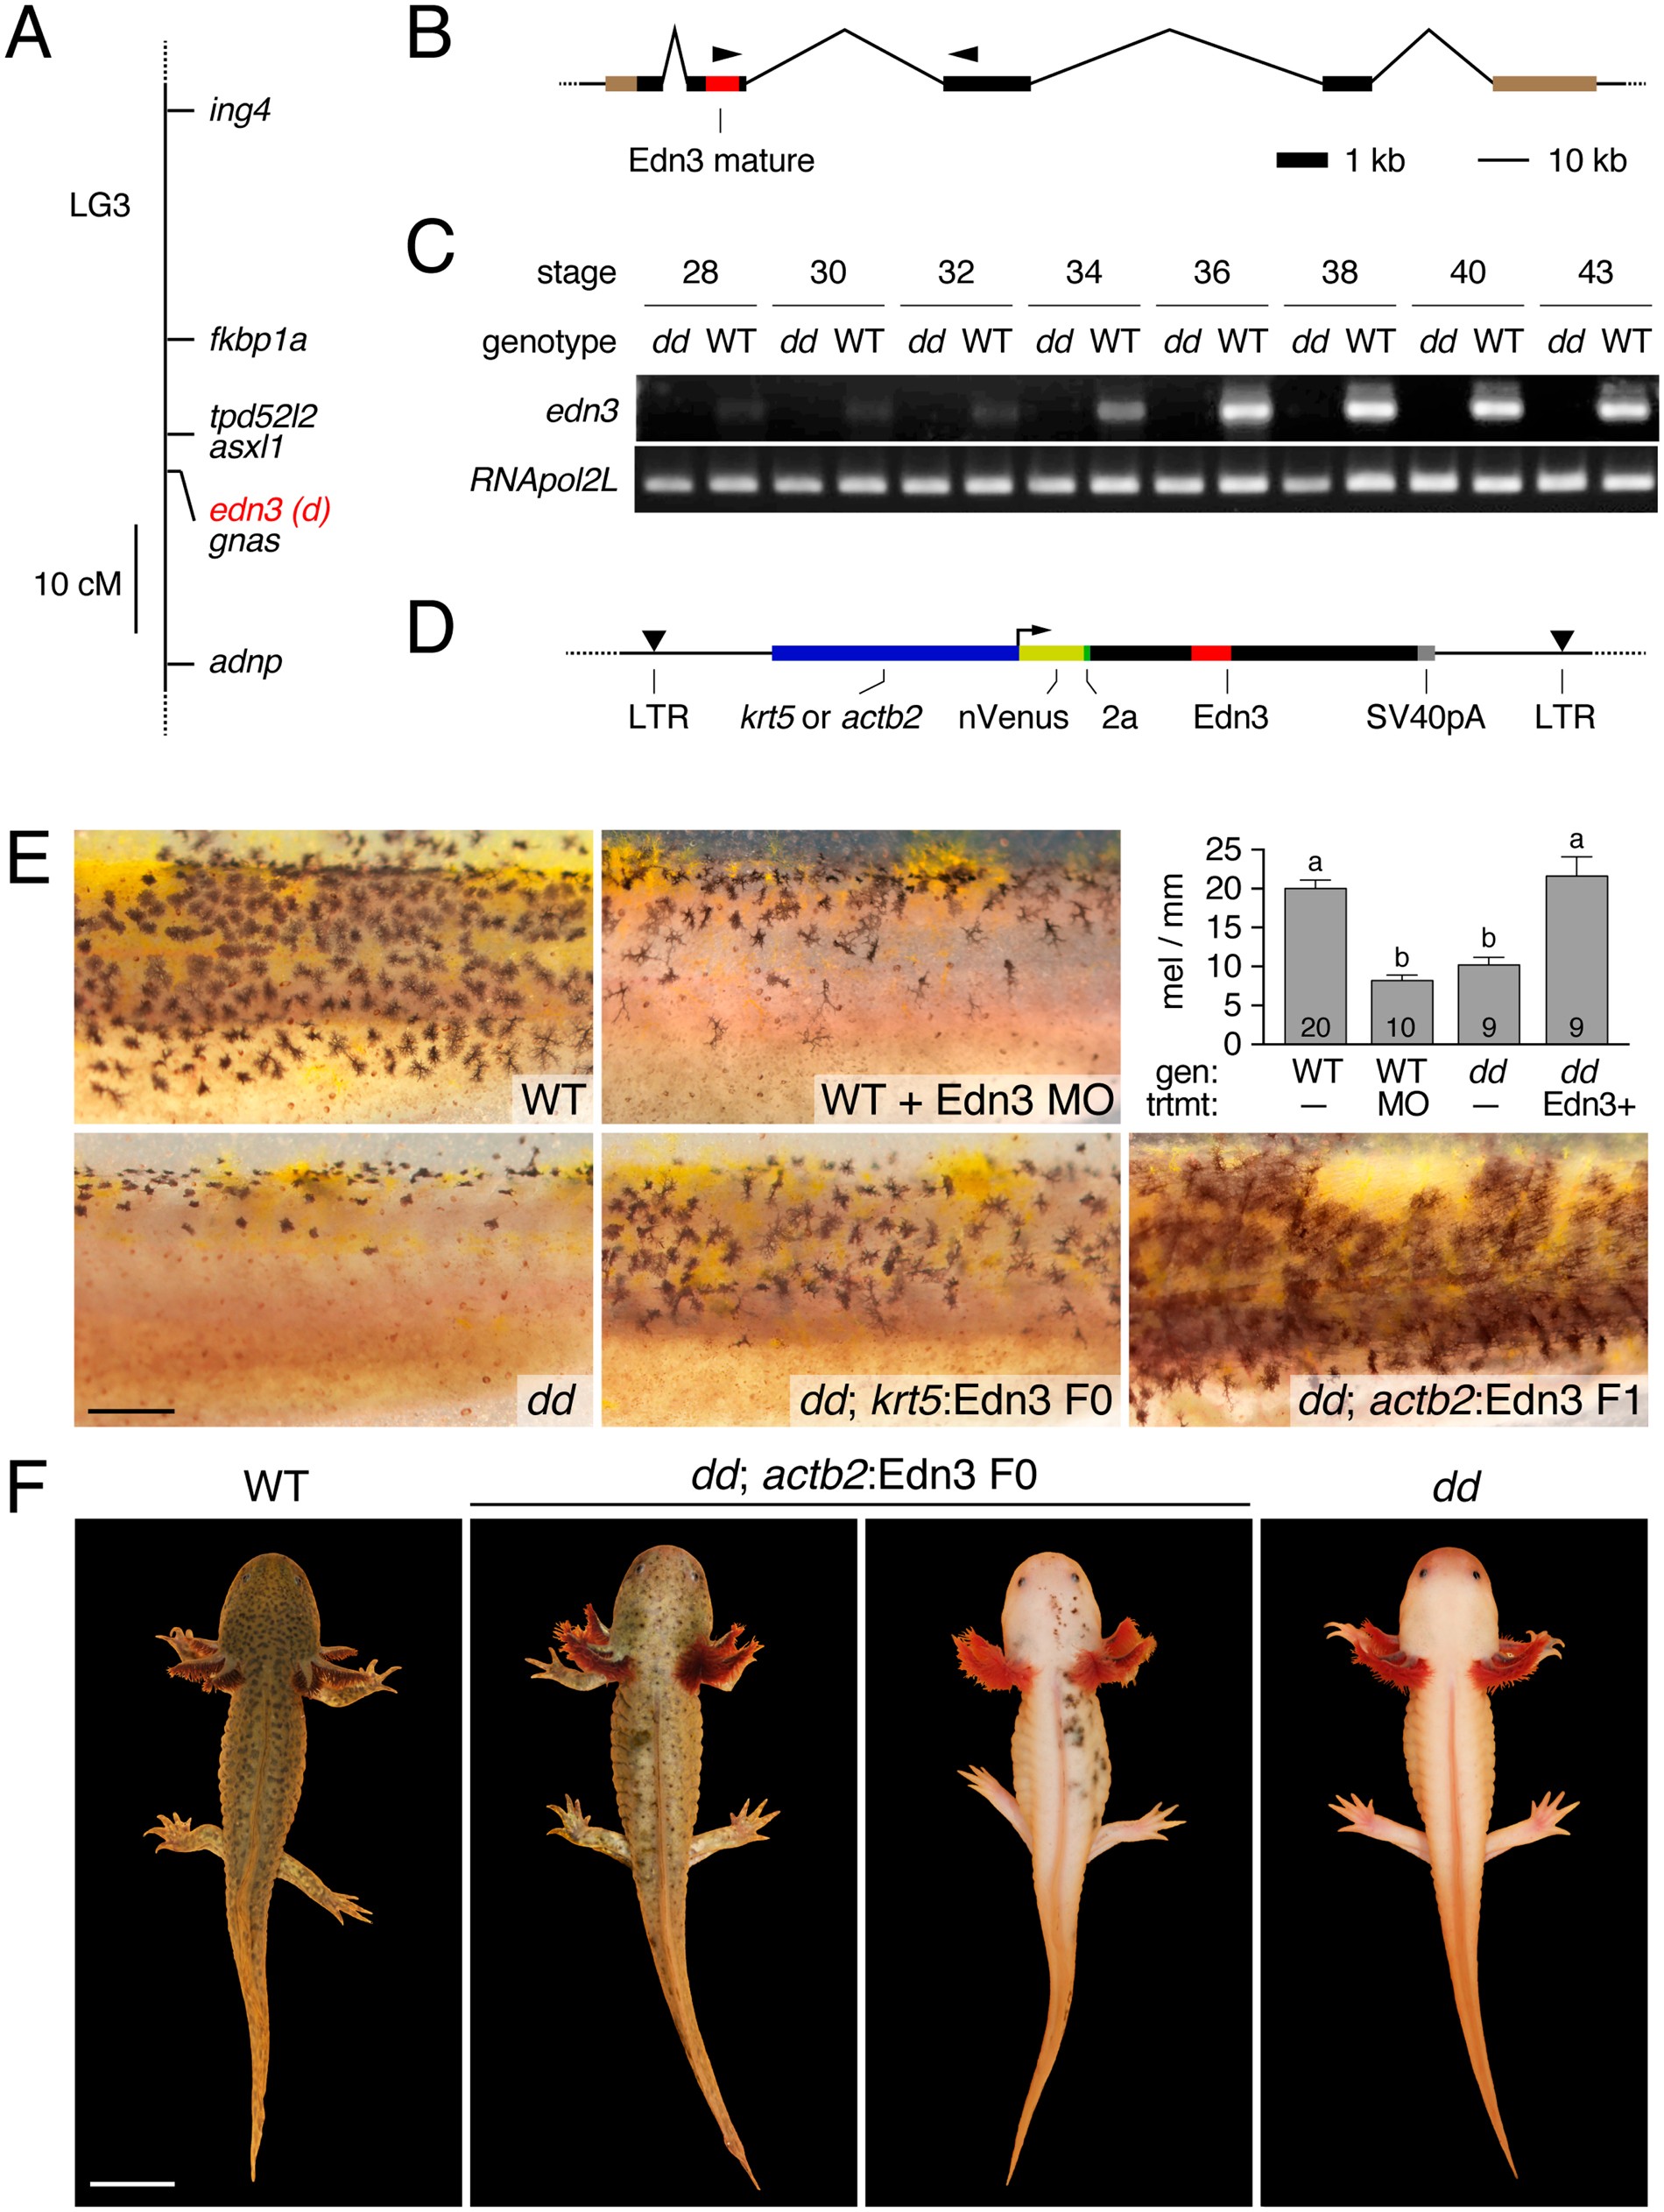 Identification Of Mutant Genes And Introgressed Tiger Salamander Dna In The Laboratory Axolotl Ambystoma Mexicanum Scientific Reports